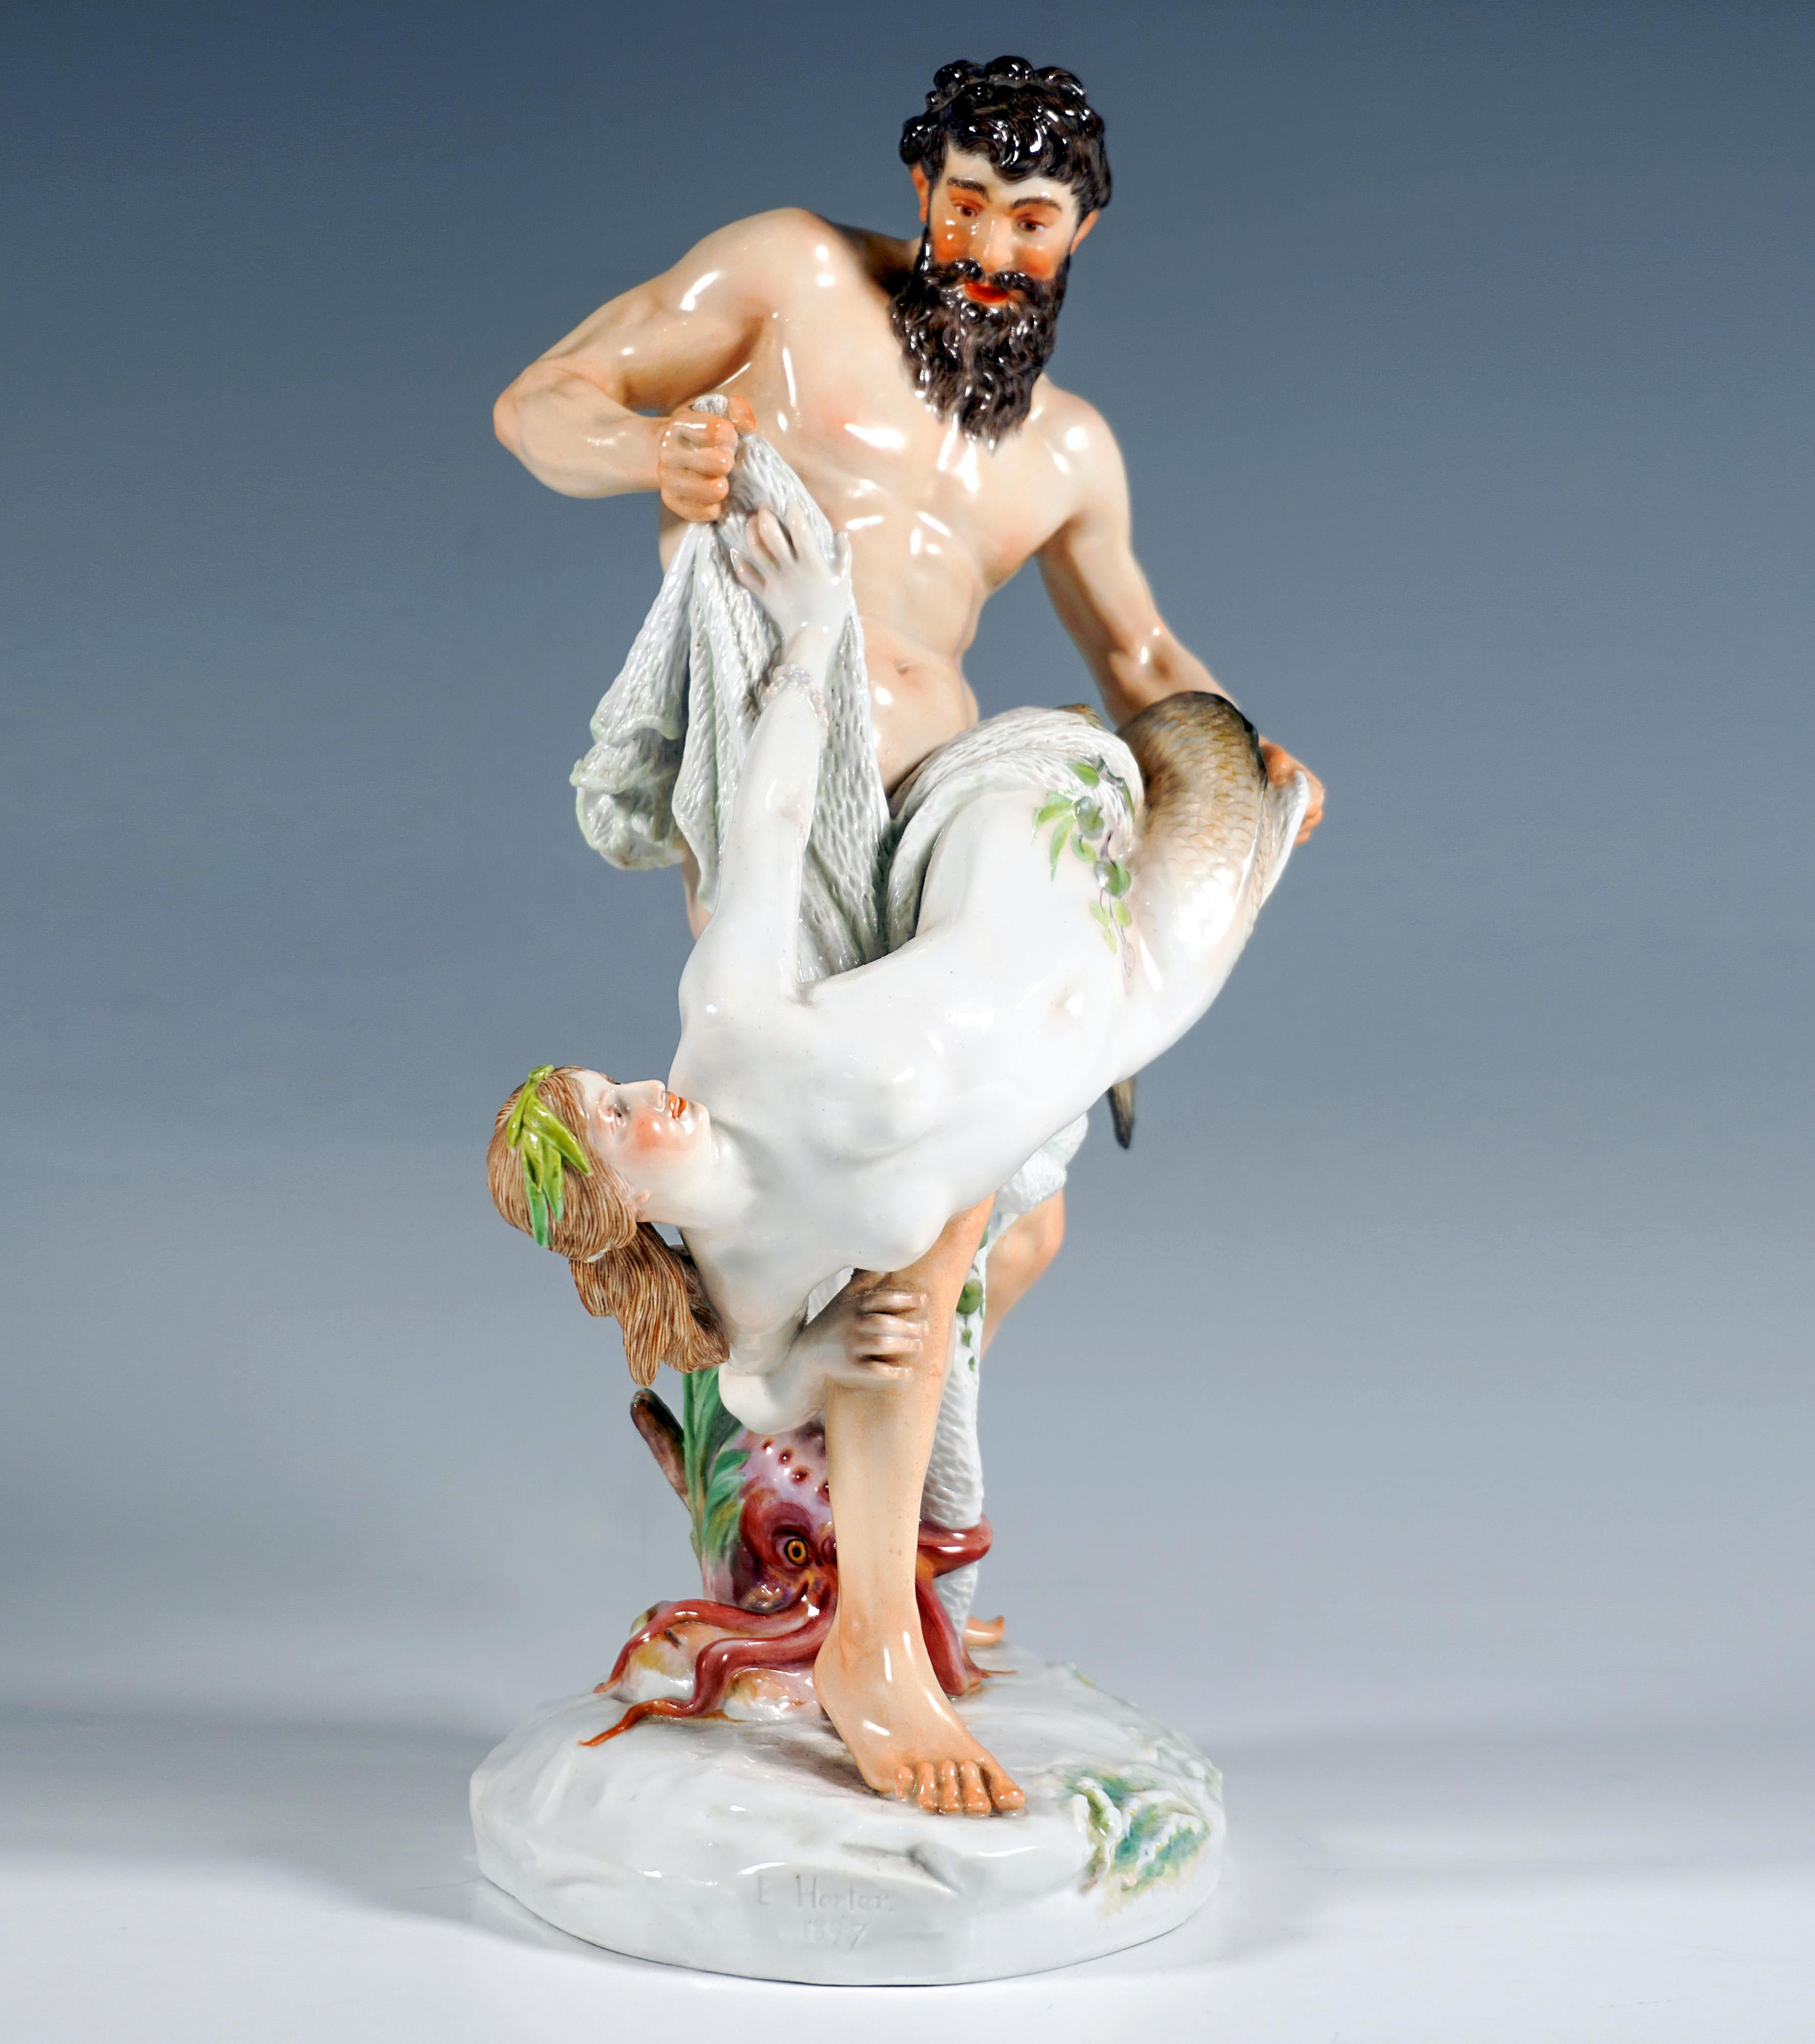 Exquisite Large Meissen Art Nouveau Porcelain Group:
Exceptional detailed depiction of an unclothed sturdy fisherman with thick beard, freeing his catch, a beautiful mermaid adorned with pearl ribbons and aquatic plants with two intertwined fin